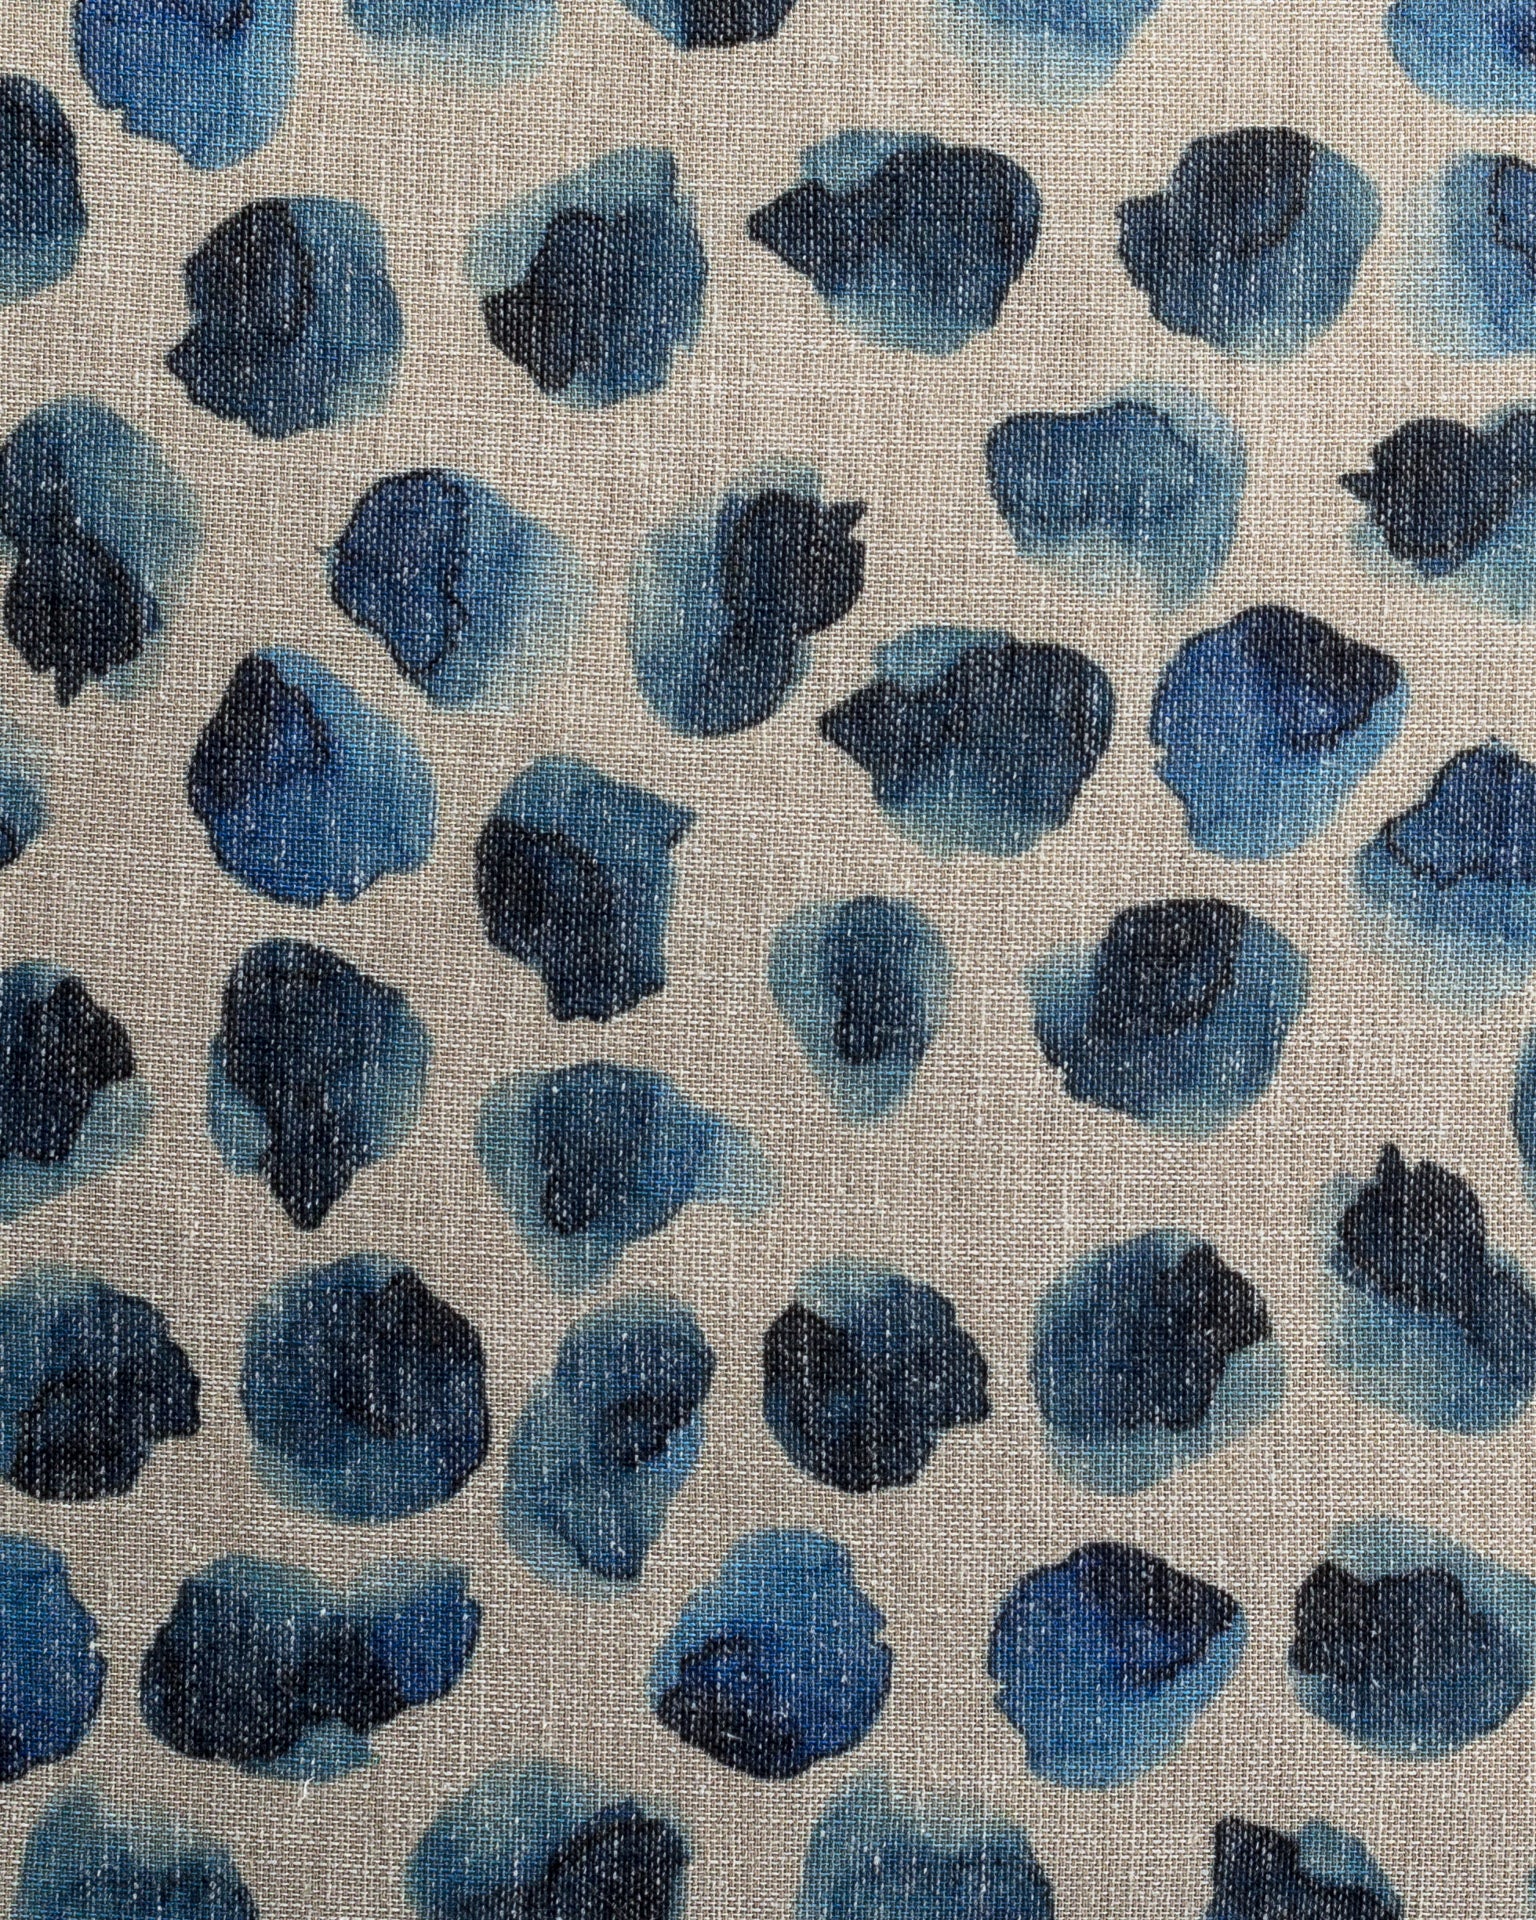 Close-up of a Gabby Blurry Dot Indigo Pillow 26x26 featuring abstract blue and black splotches on a textured beige bungalow background, resembling a watercolor design.